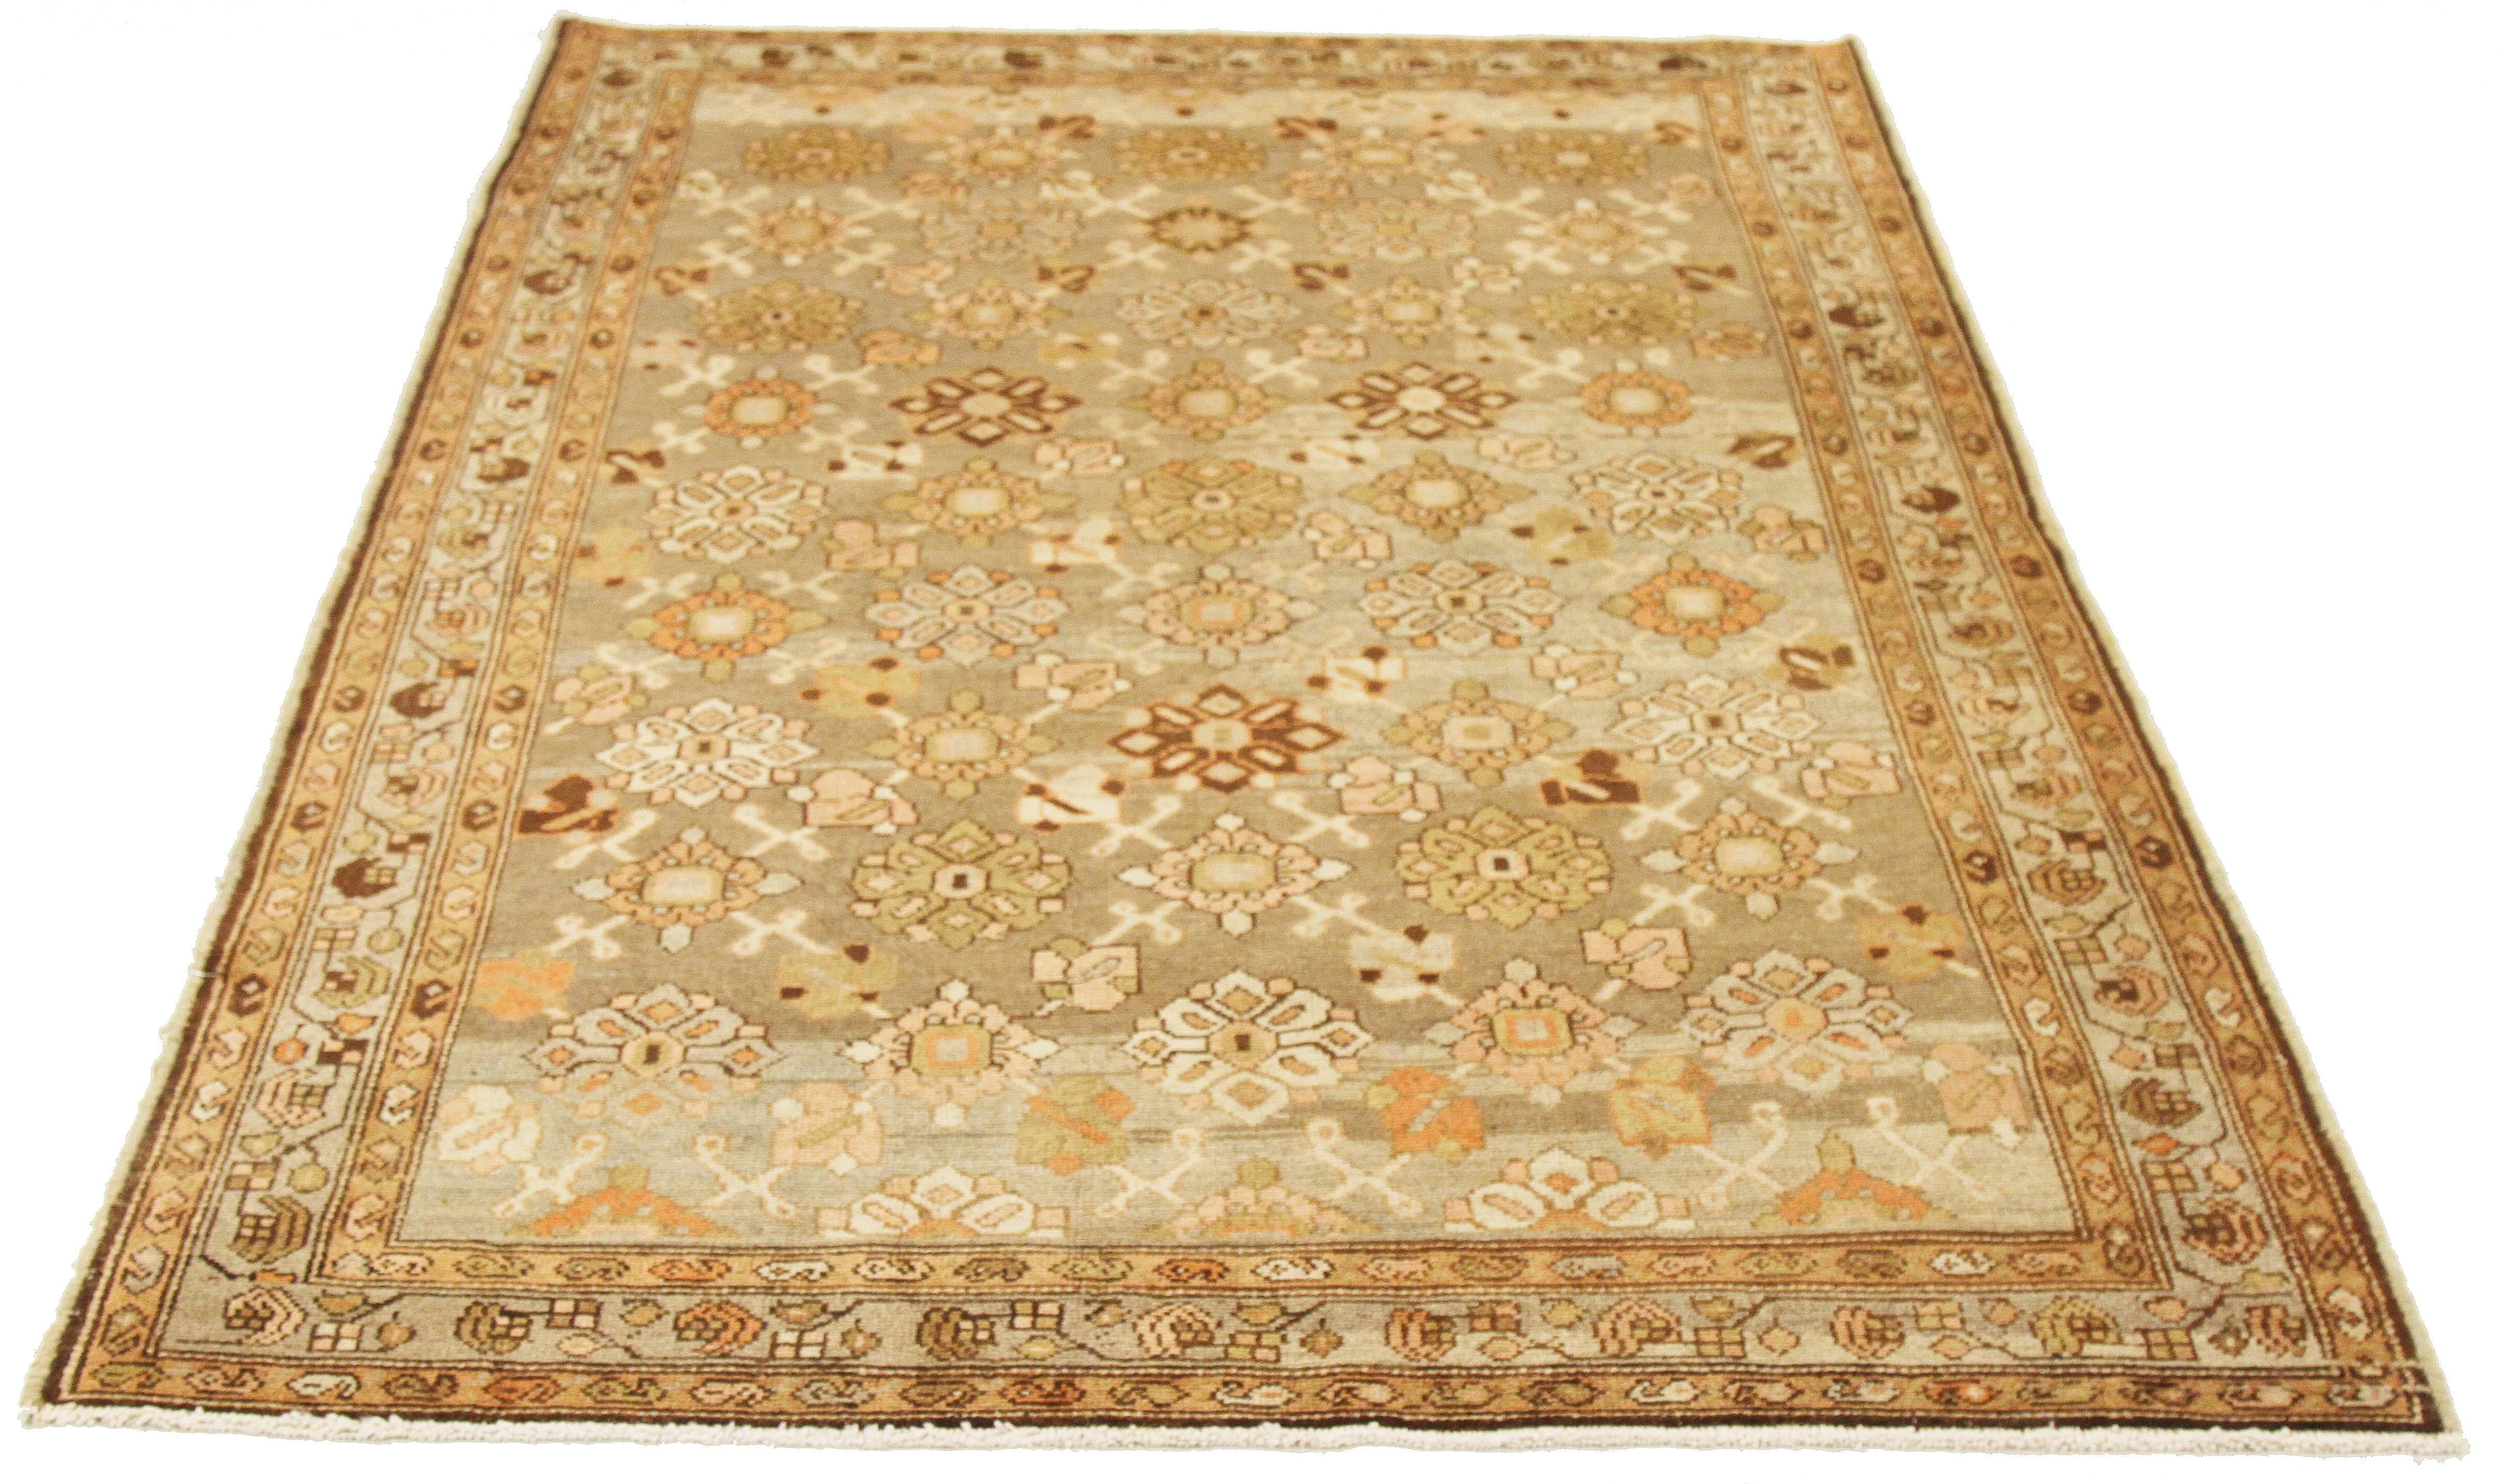 Antique Persian rug handwoven from the finest sheep’s wool and colored with all-natural vegetable dyes that are safe for humans and pets. It’s a traditional Malayer design featuring colored flower heads details all-over the ivory and gray field.